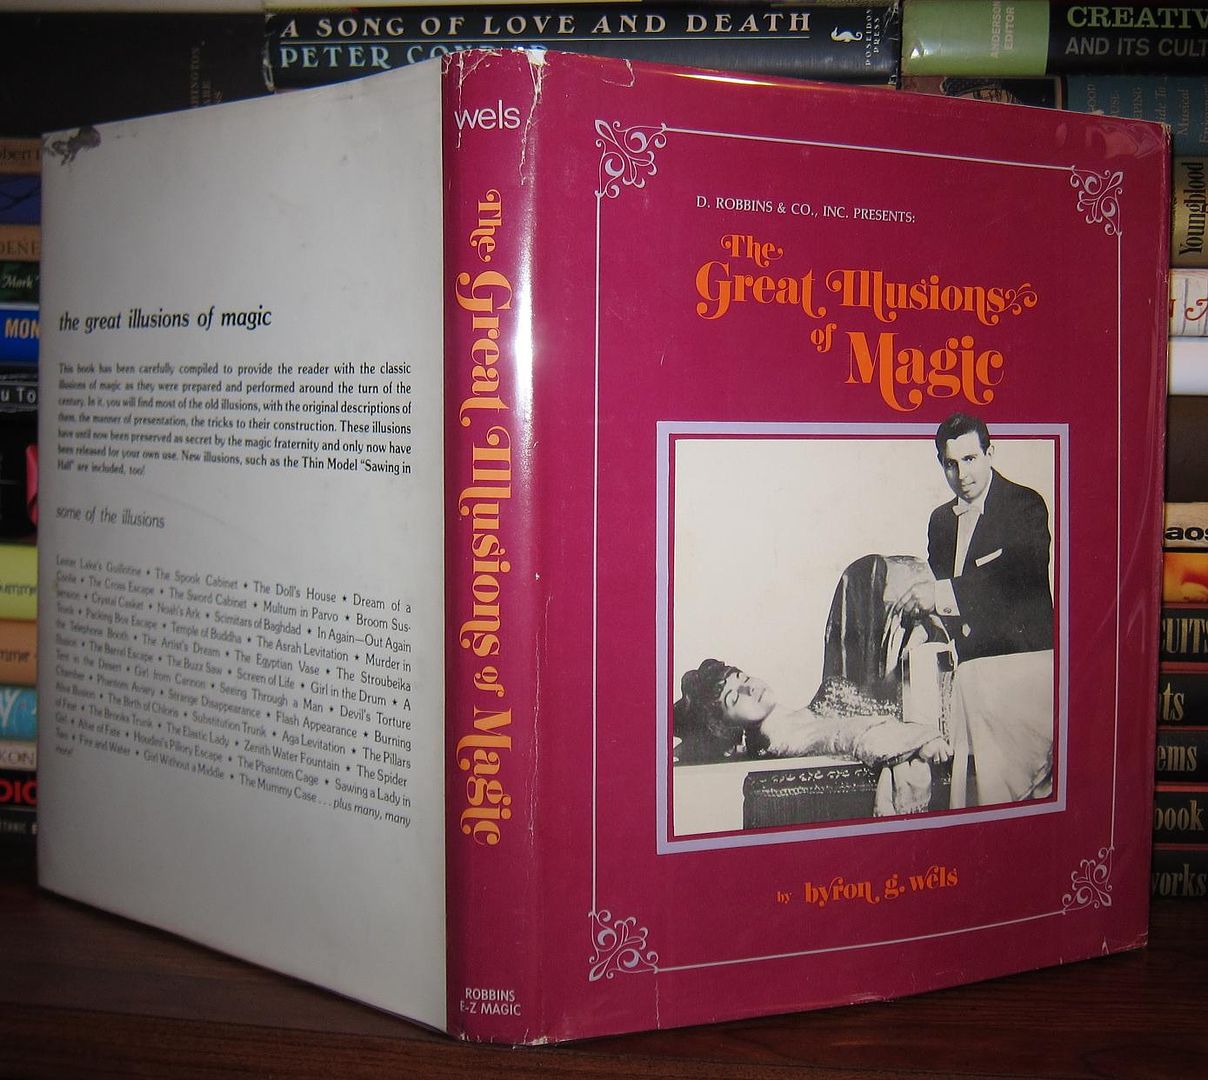 WELS, BYRON G. - LOUIS TANNEN - The Great Illusions of Magic the Text